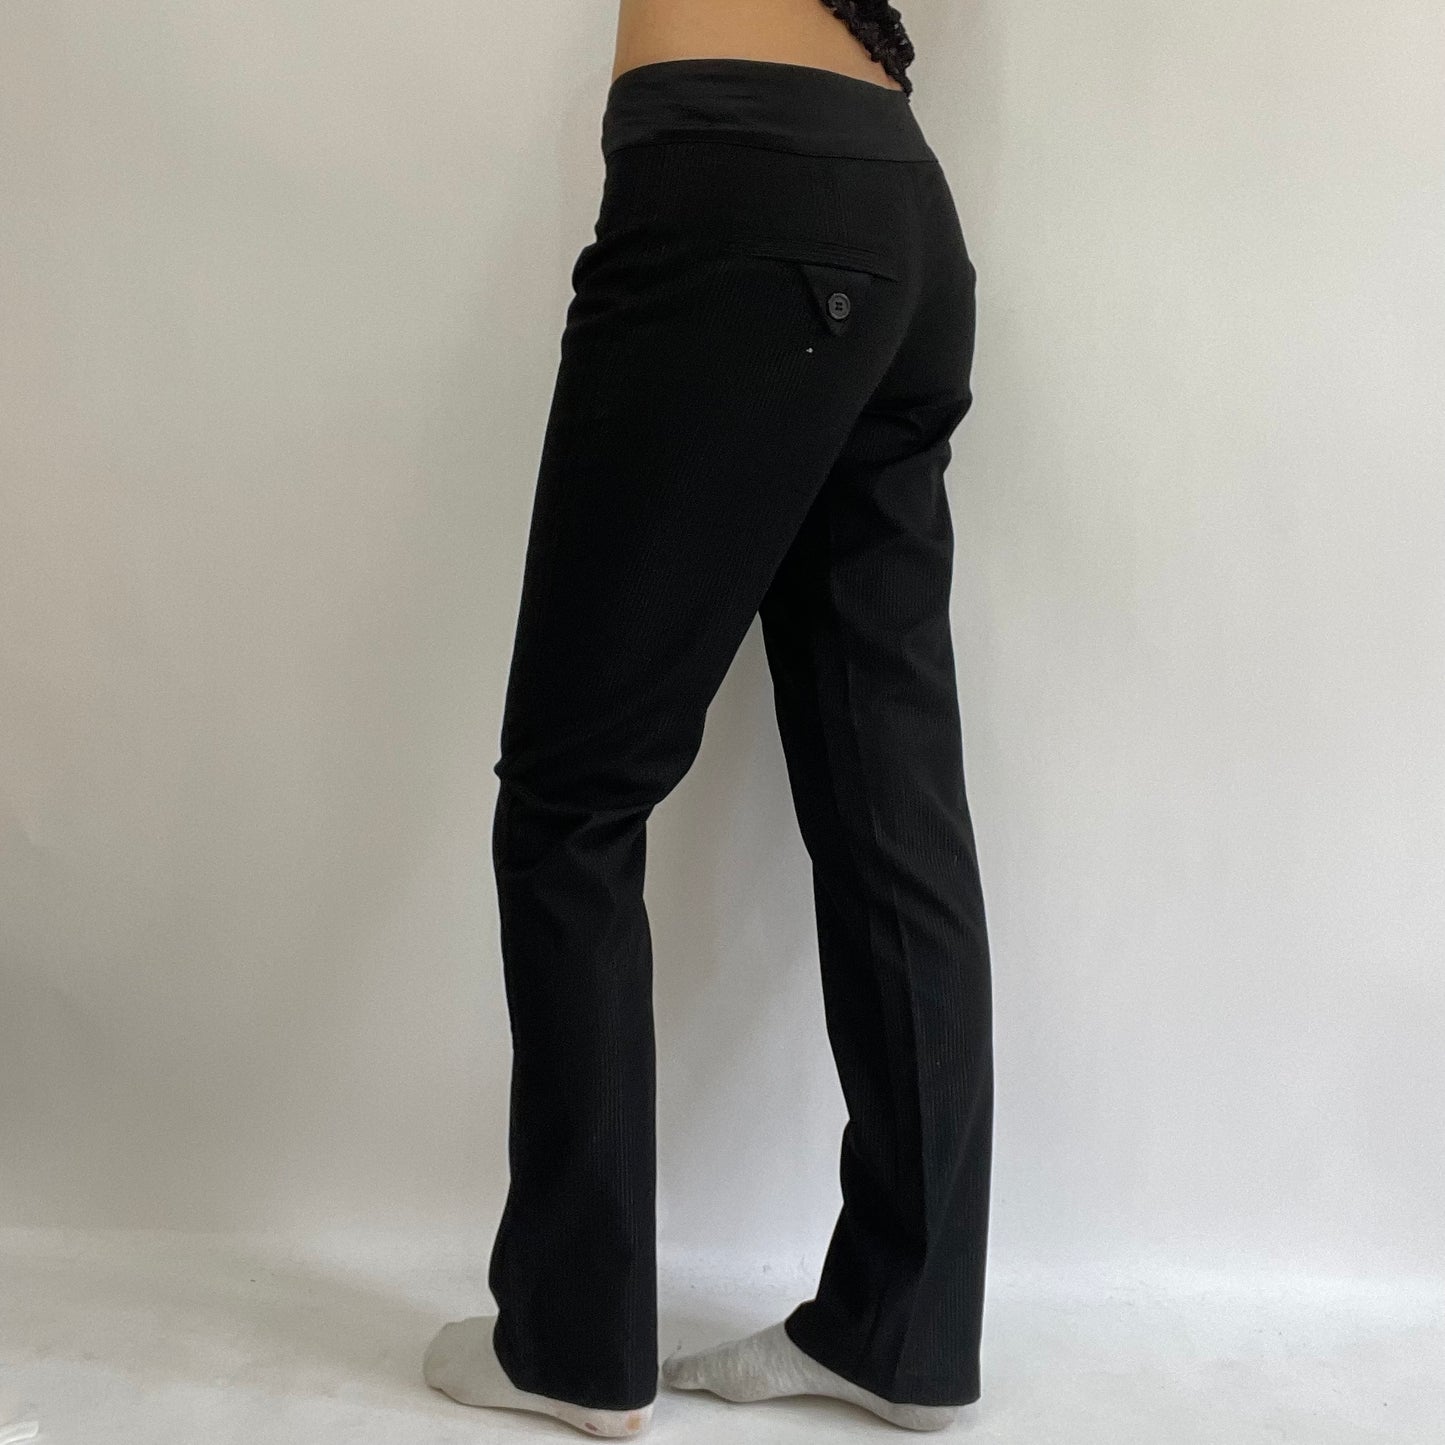 HAILEY BIEBER DROP | small black sparkly pinstripe trousers